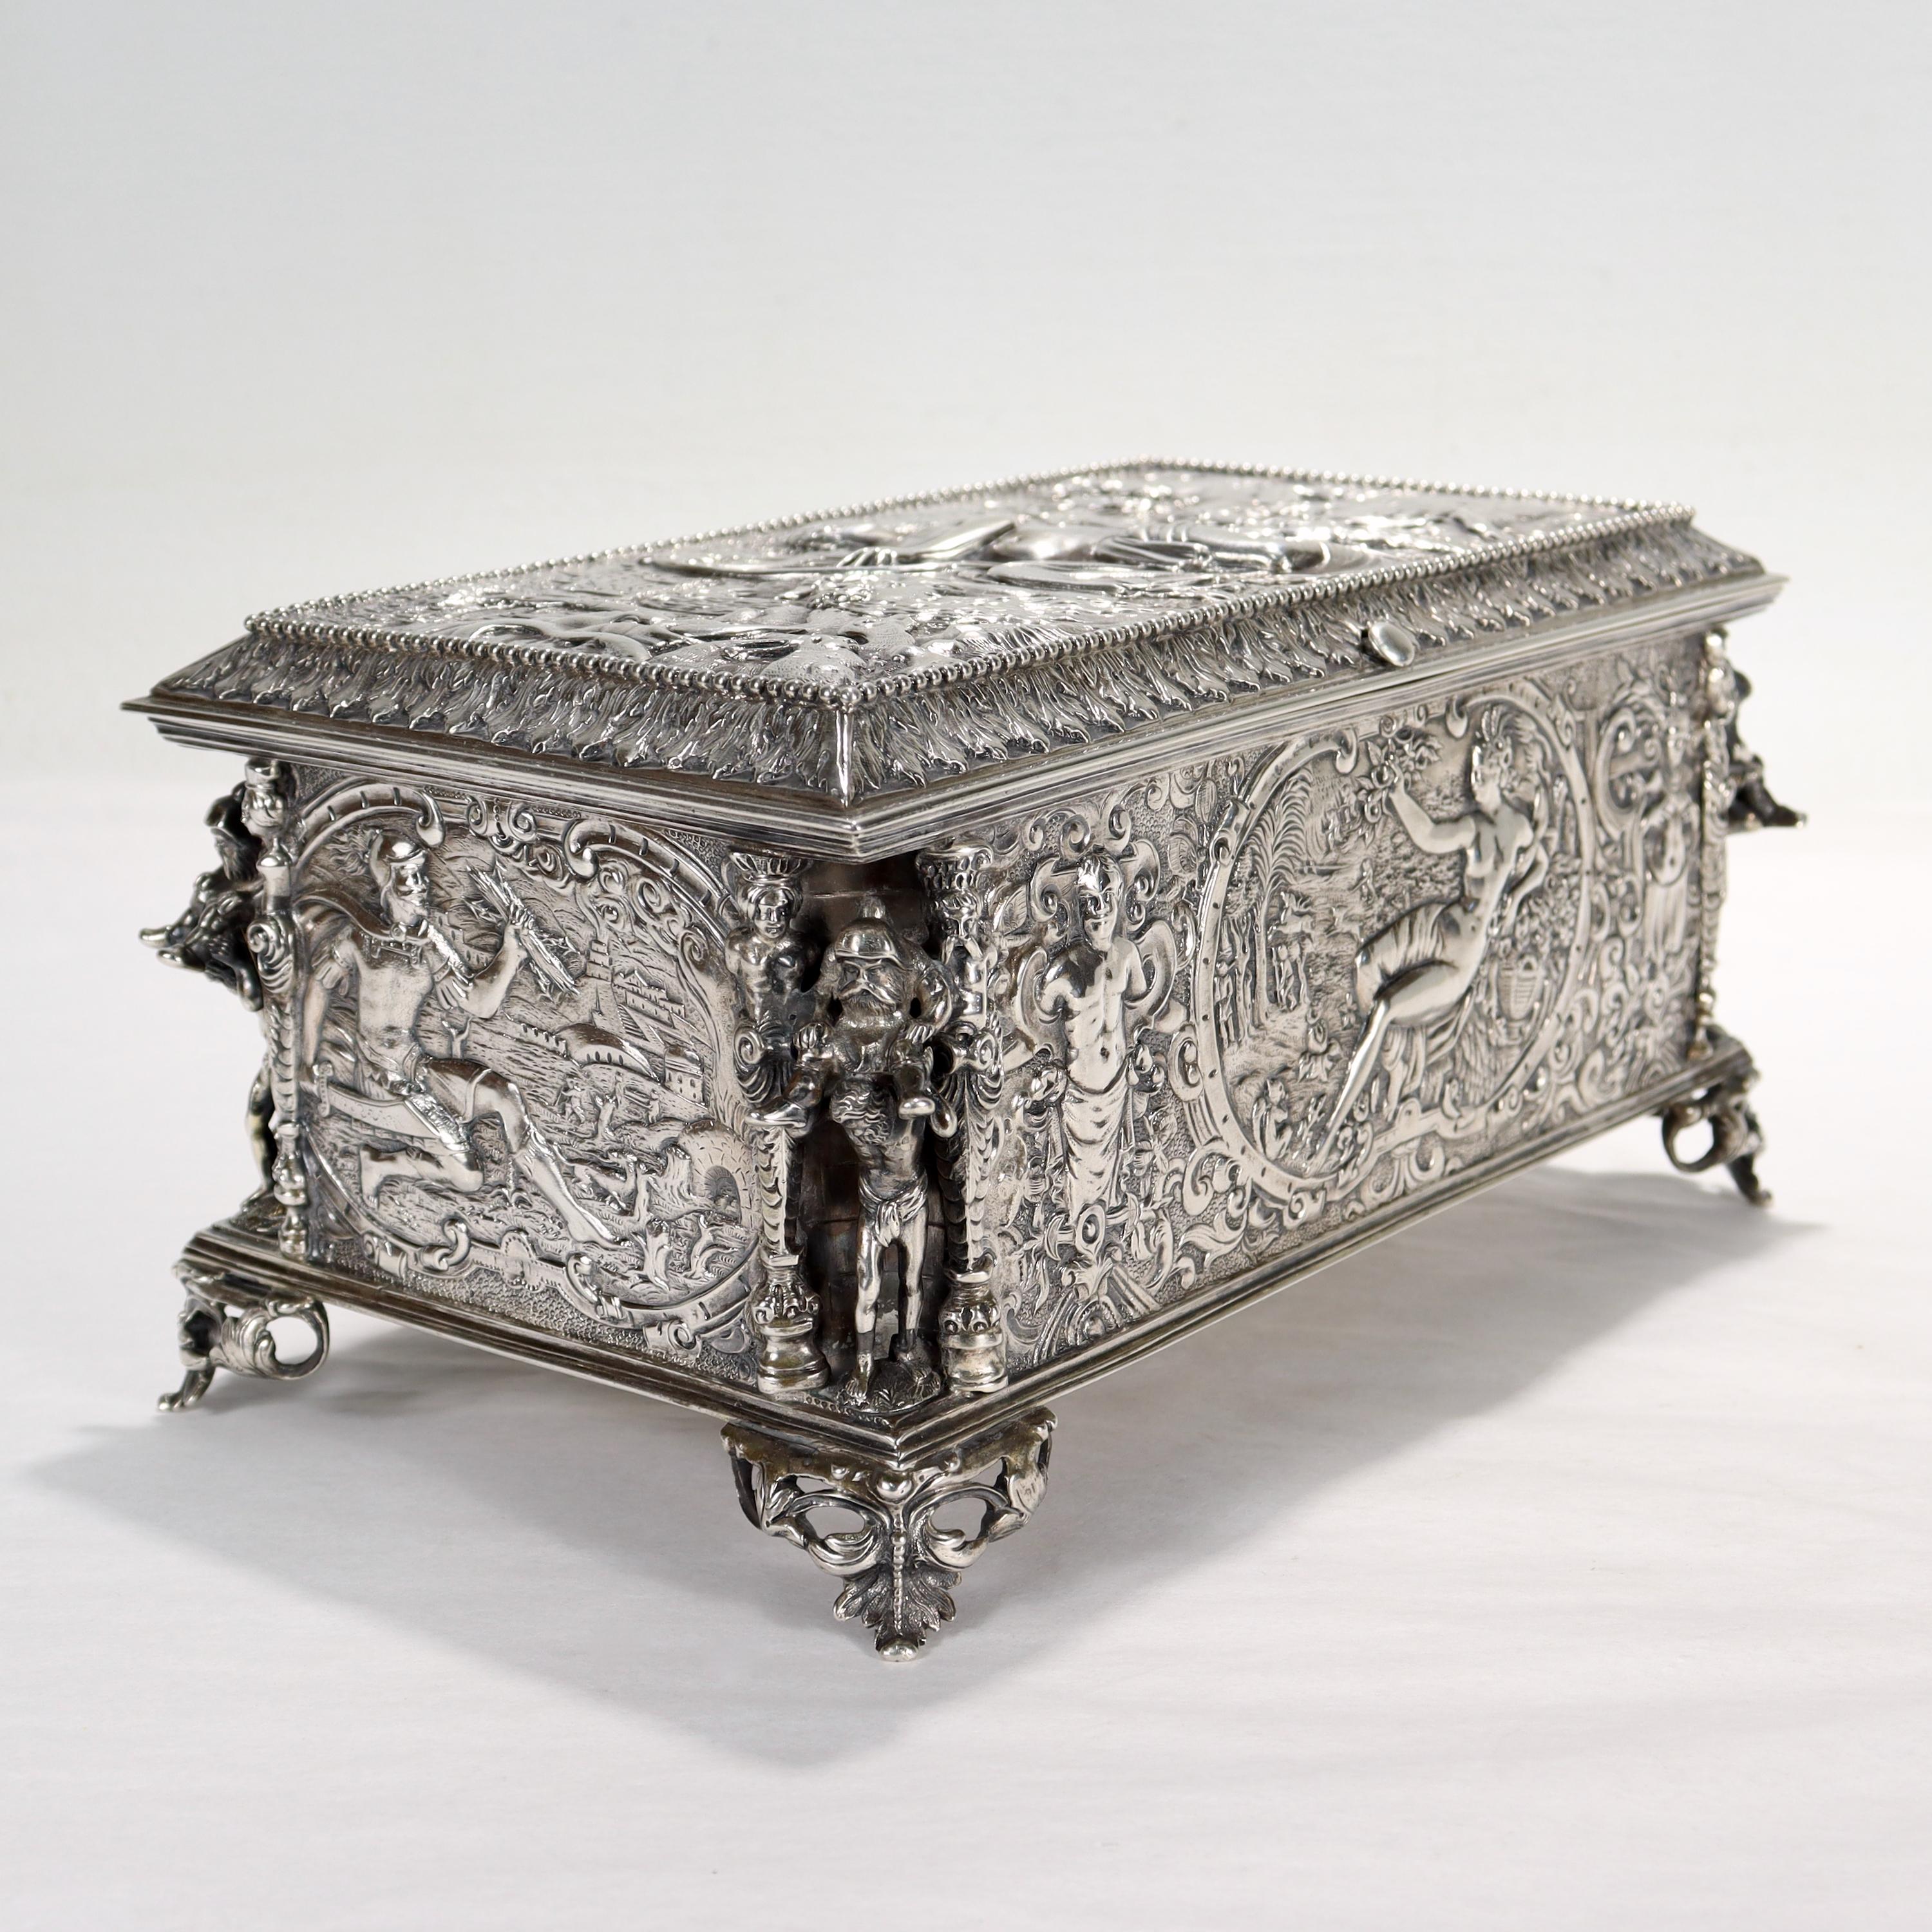 A very fine Renaissance Revival table box or casket.

In solid silver (likely 800 fine).

Likely by Gebrüder Neumann or Storck & Sinsheimer of Hanau, Germany. (Storck & Sinsheimer exhibited at the 1876 Philadelphia International Exhibition.)

With a